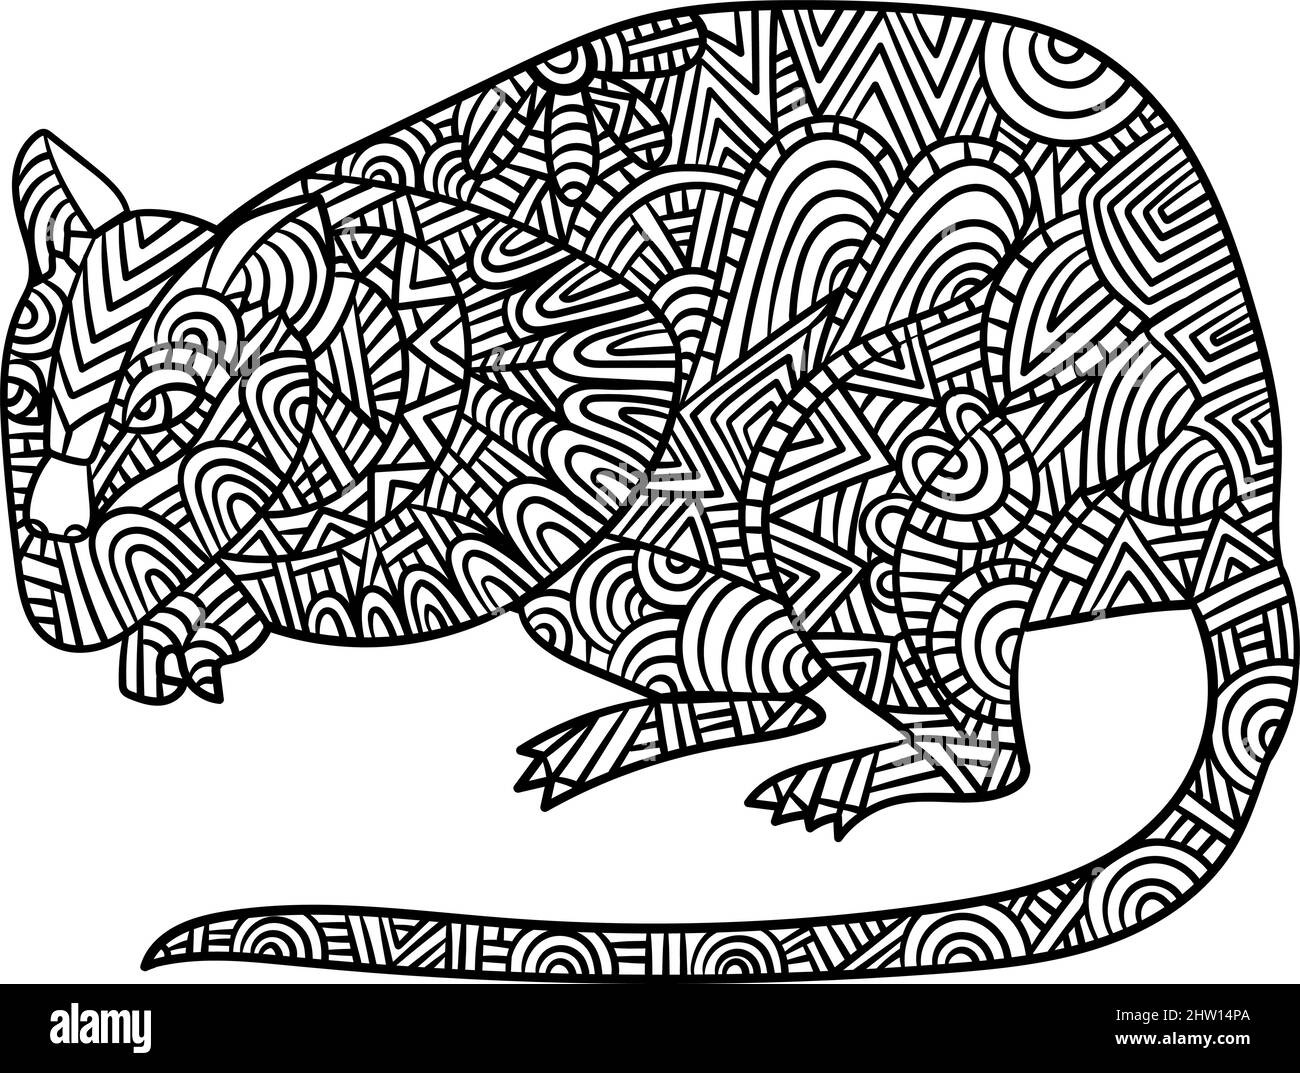 Rat Mandala Coloring Pages for Adults Stock Vector